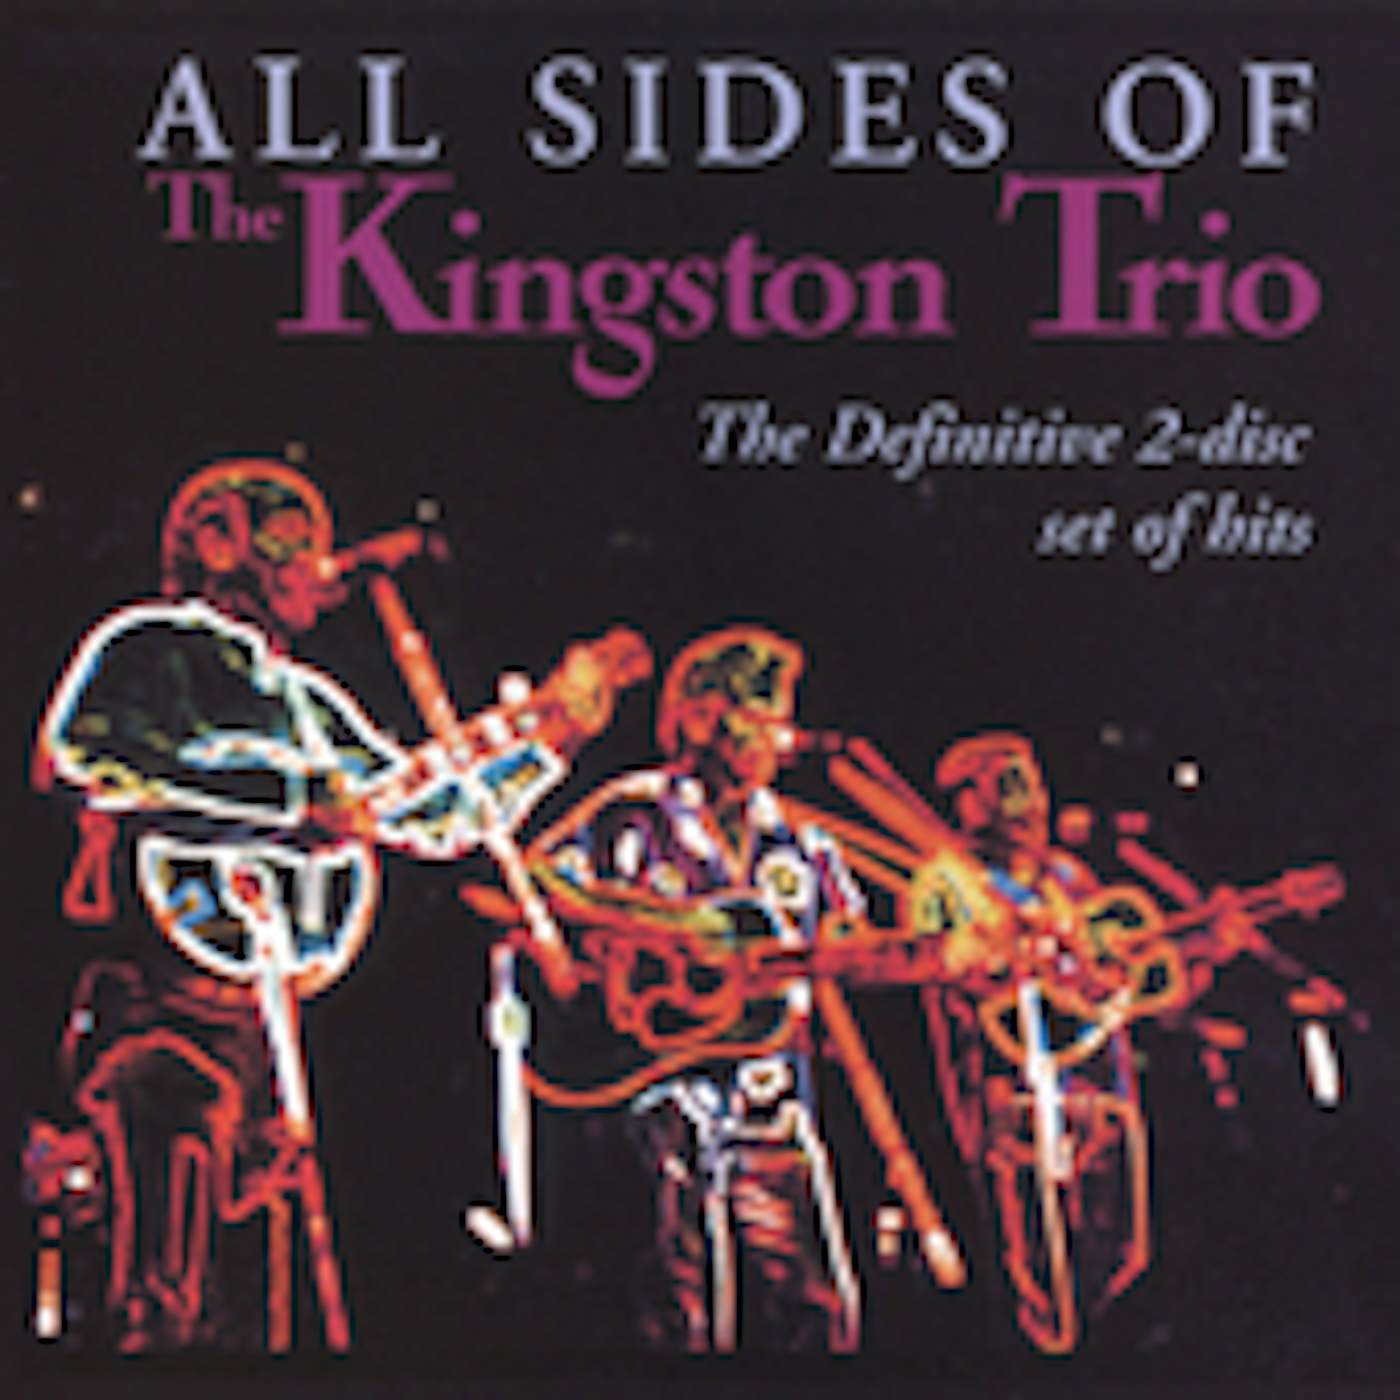 The Kingston Trio ALL SIDES OFF CD